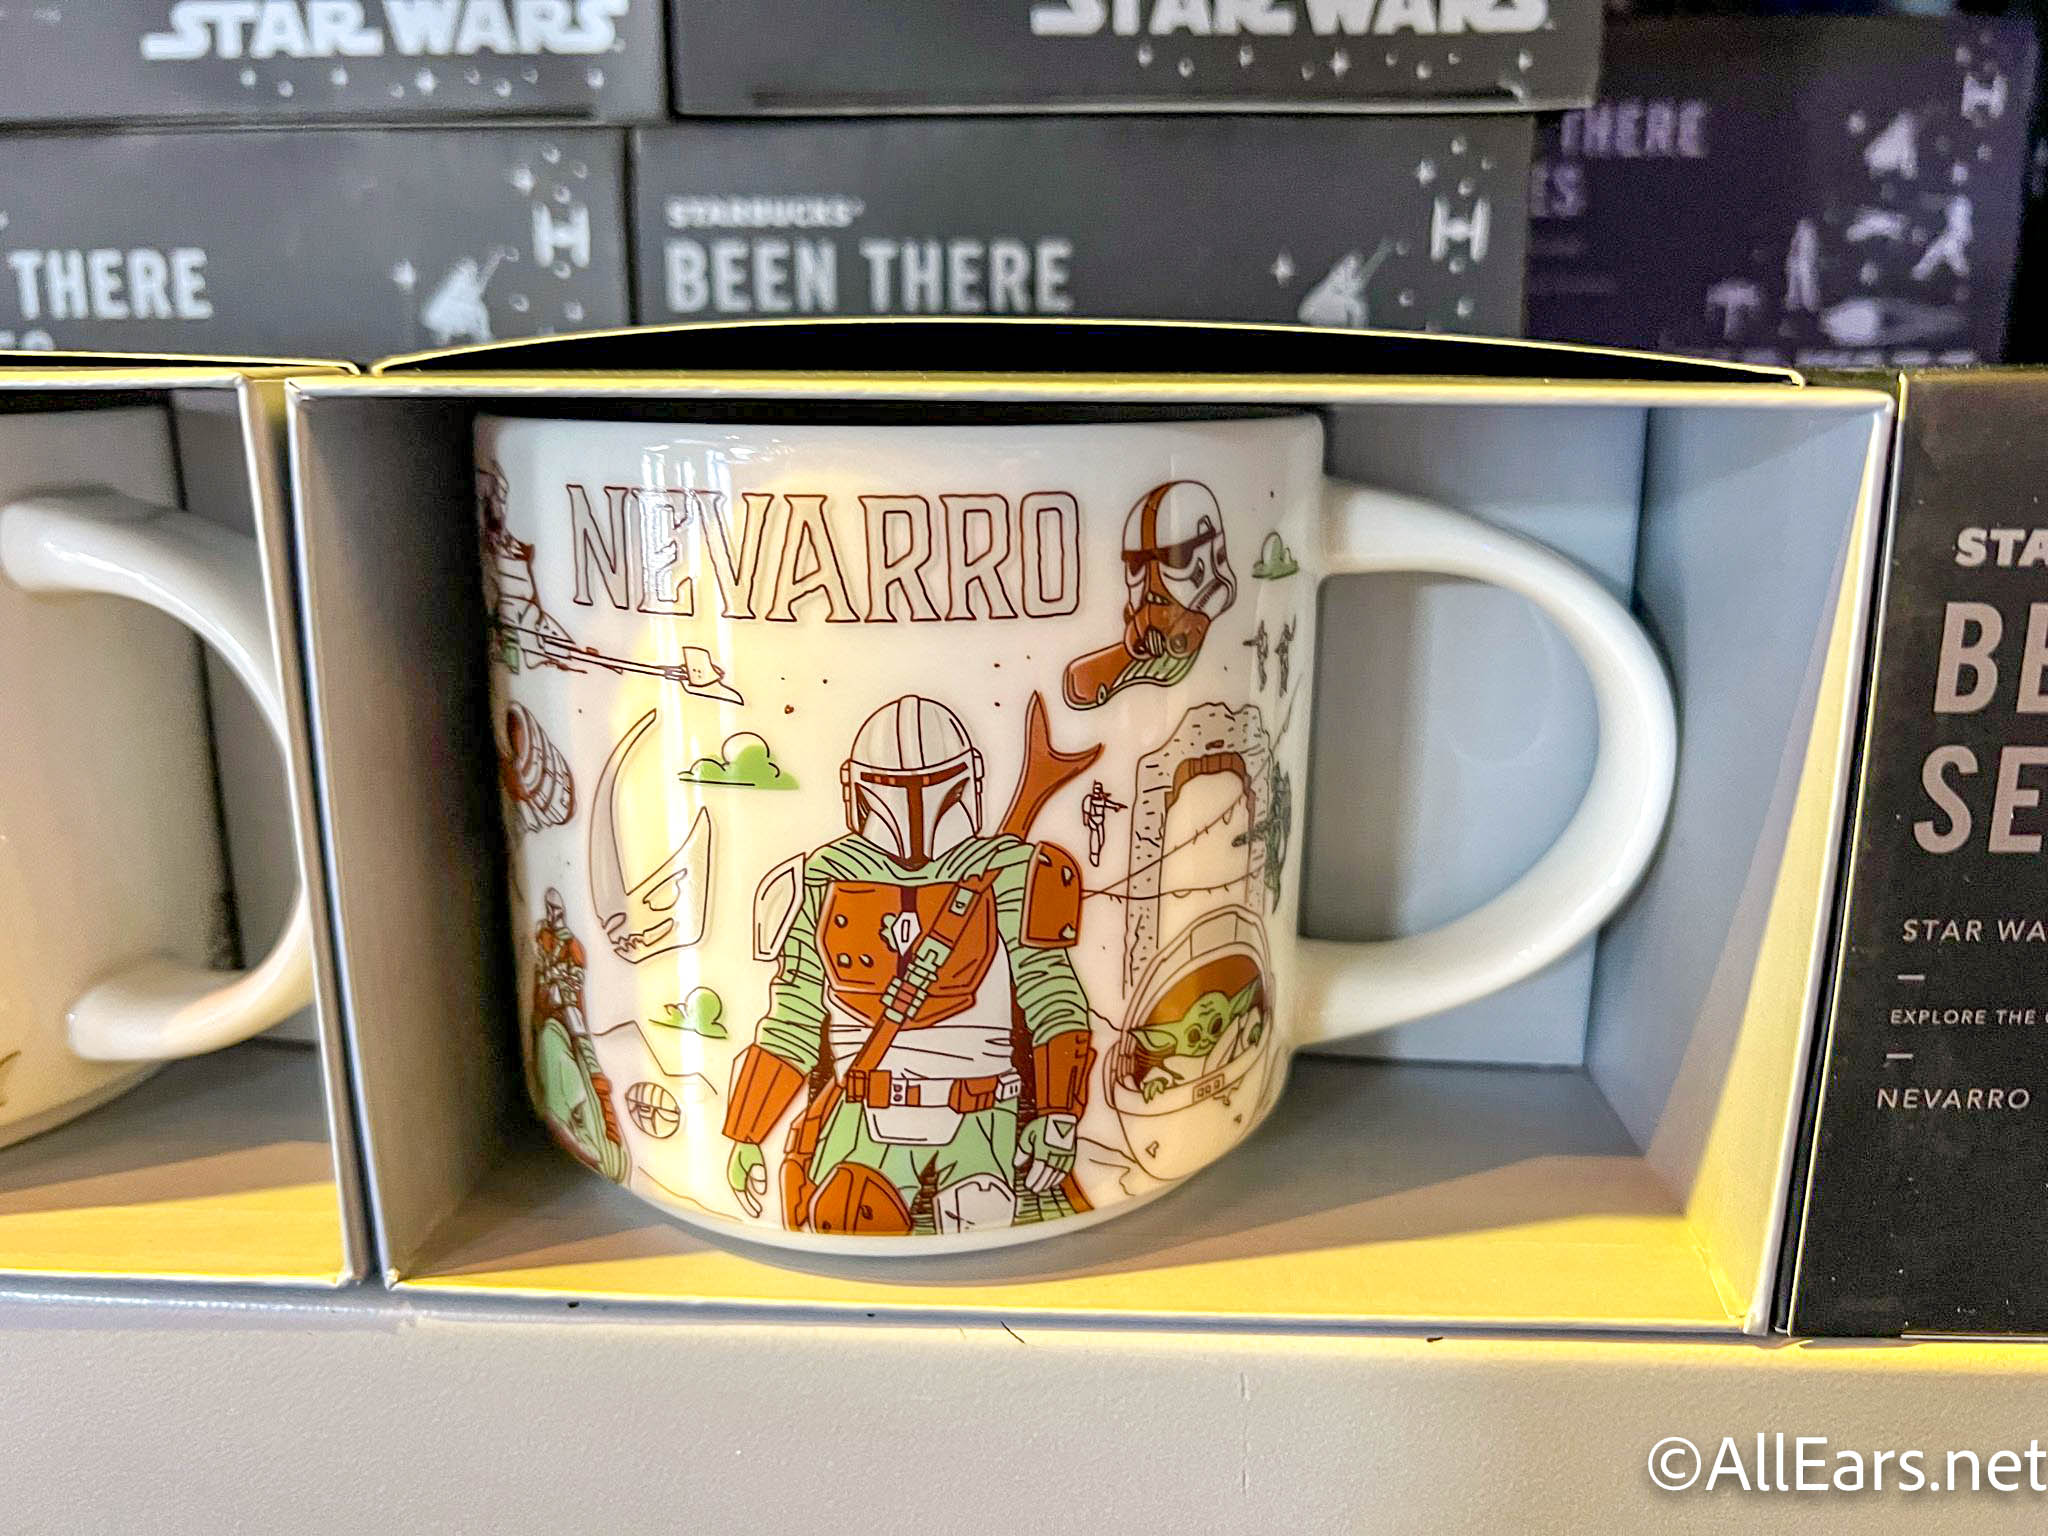 https://allears.net/wp-content/uploads/2022/05/dlr-2022-downtown-disney-star-wars-trading-post-been-there-series-mugs-starbucks-3.jpg